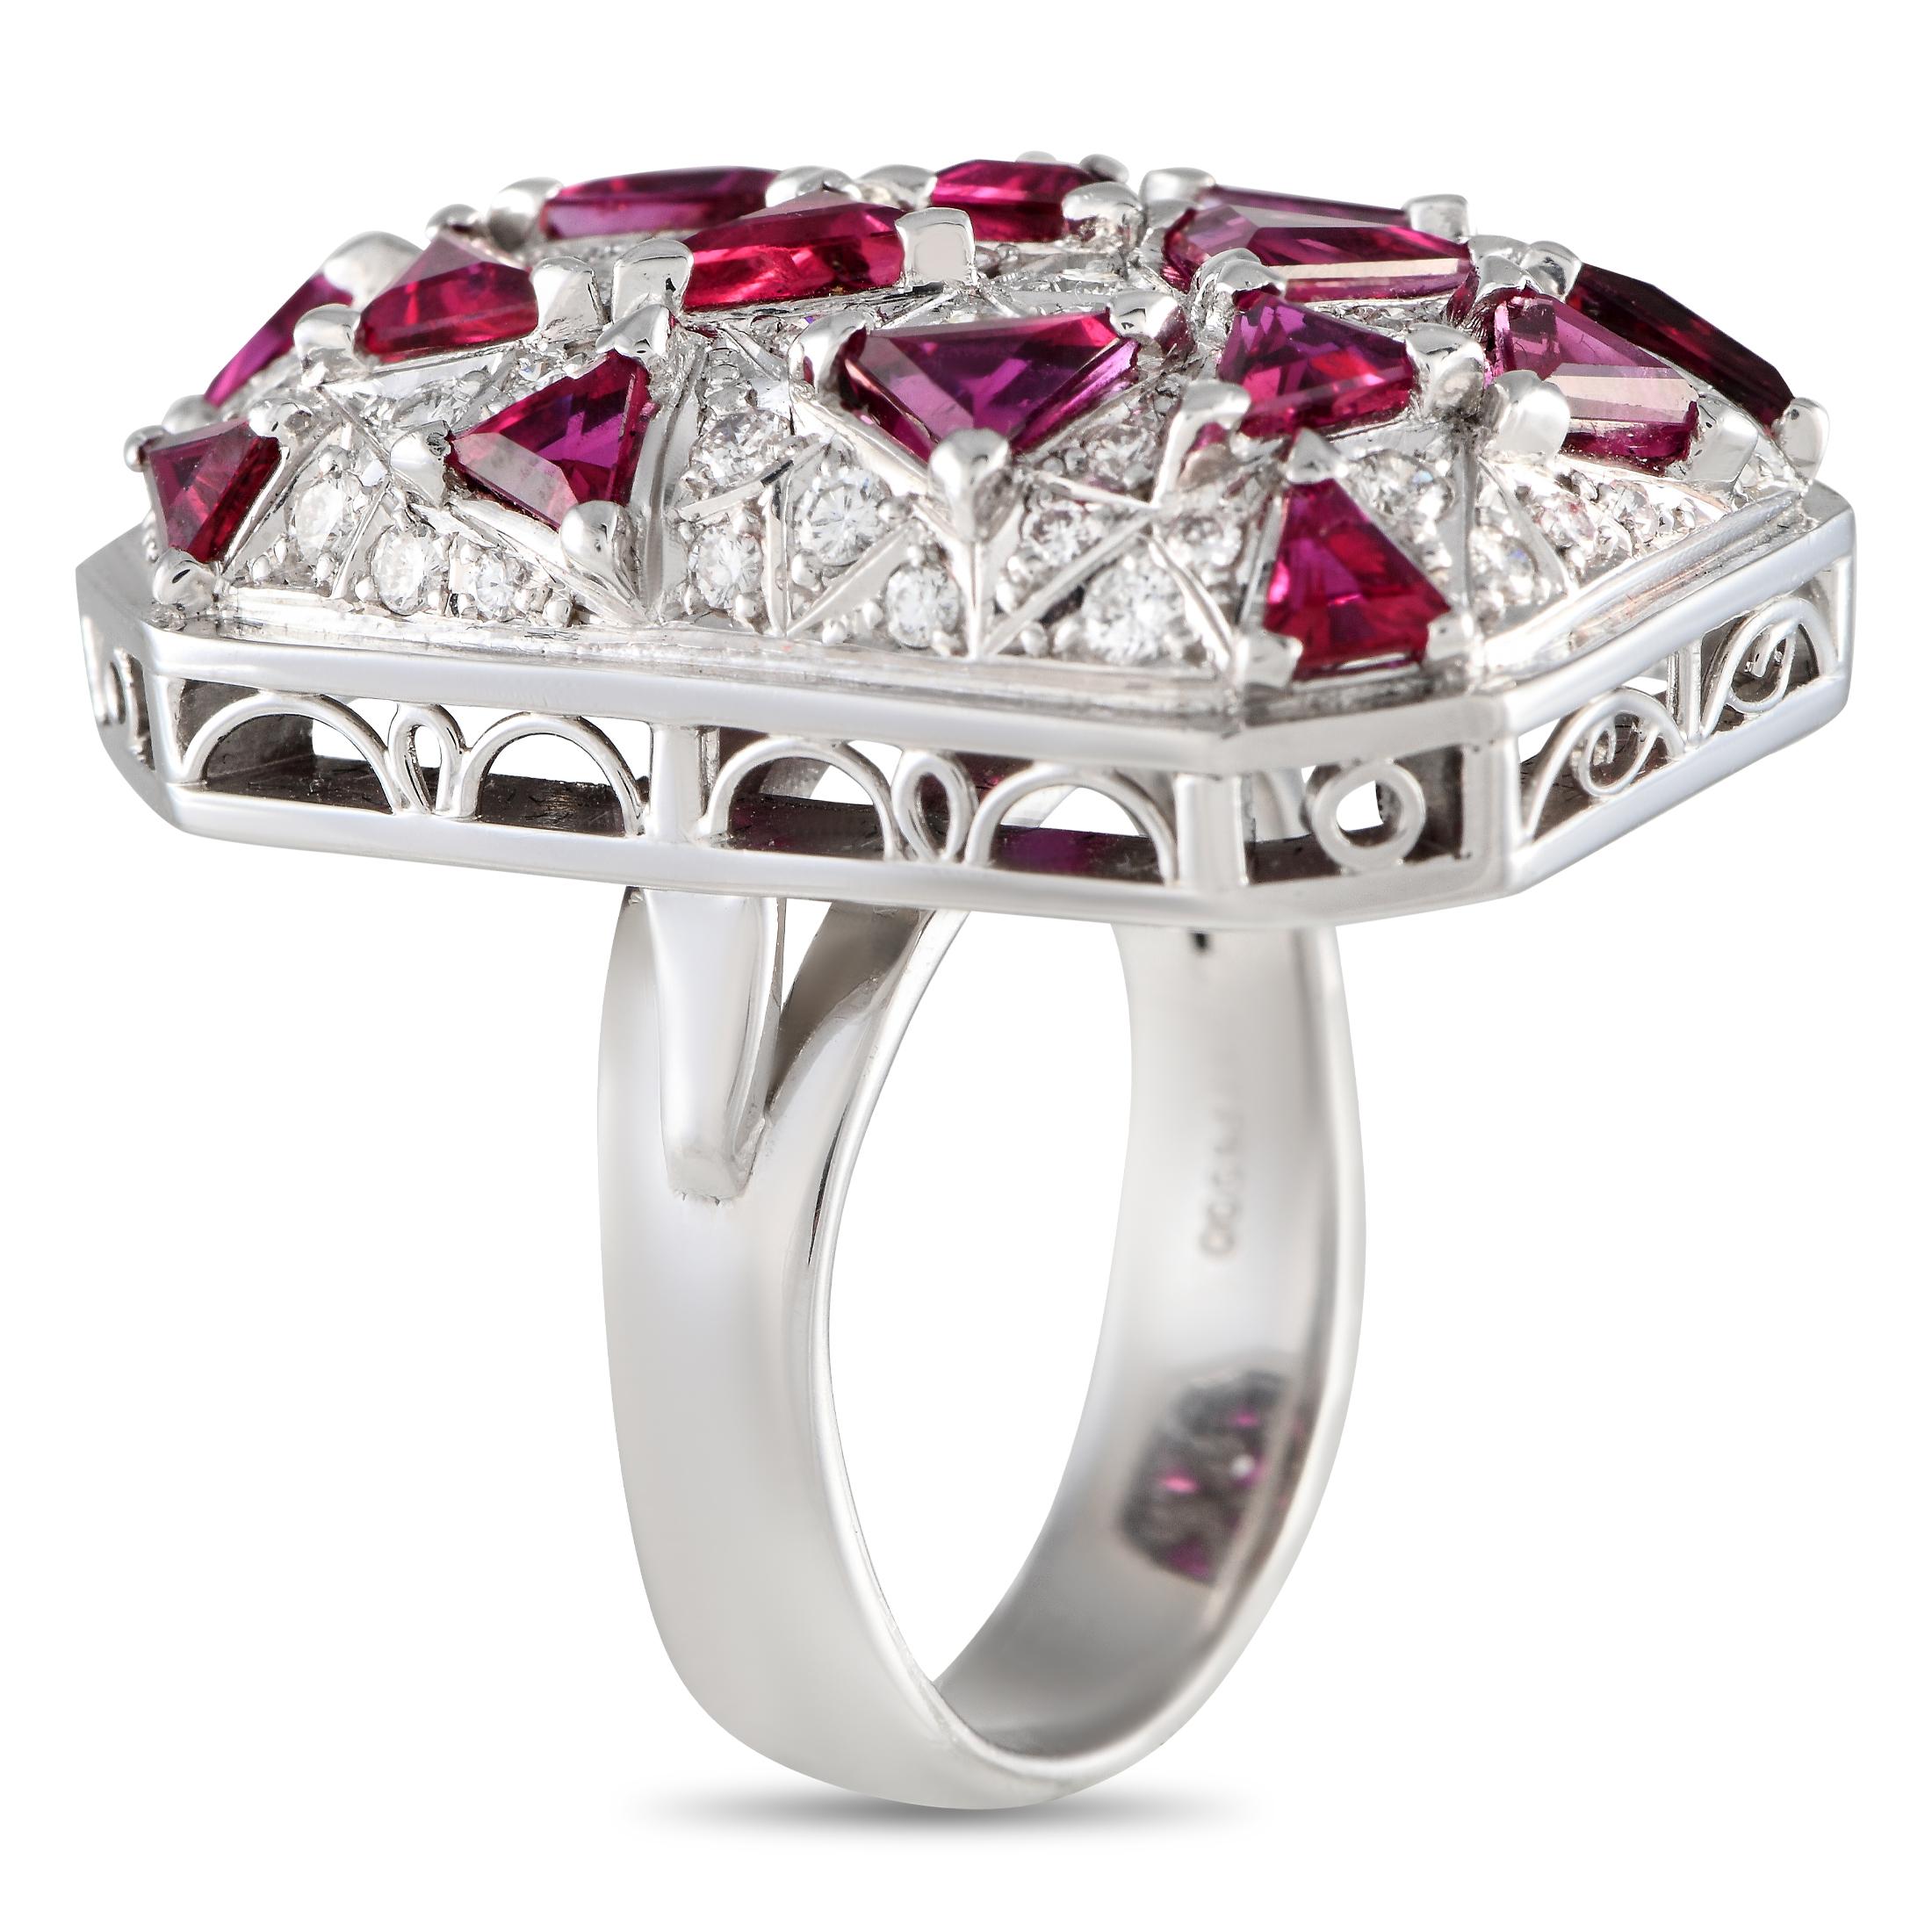 Adding this ring to your ensemble is a quick way to give it a larger-than-life finish. This statement ring features a polished 18K white gold shank topped with a geometric cluster of glitter. The convex centerpiece features fancy-cut rubies